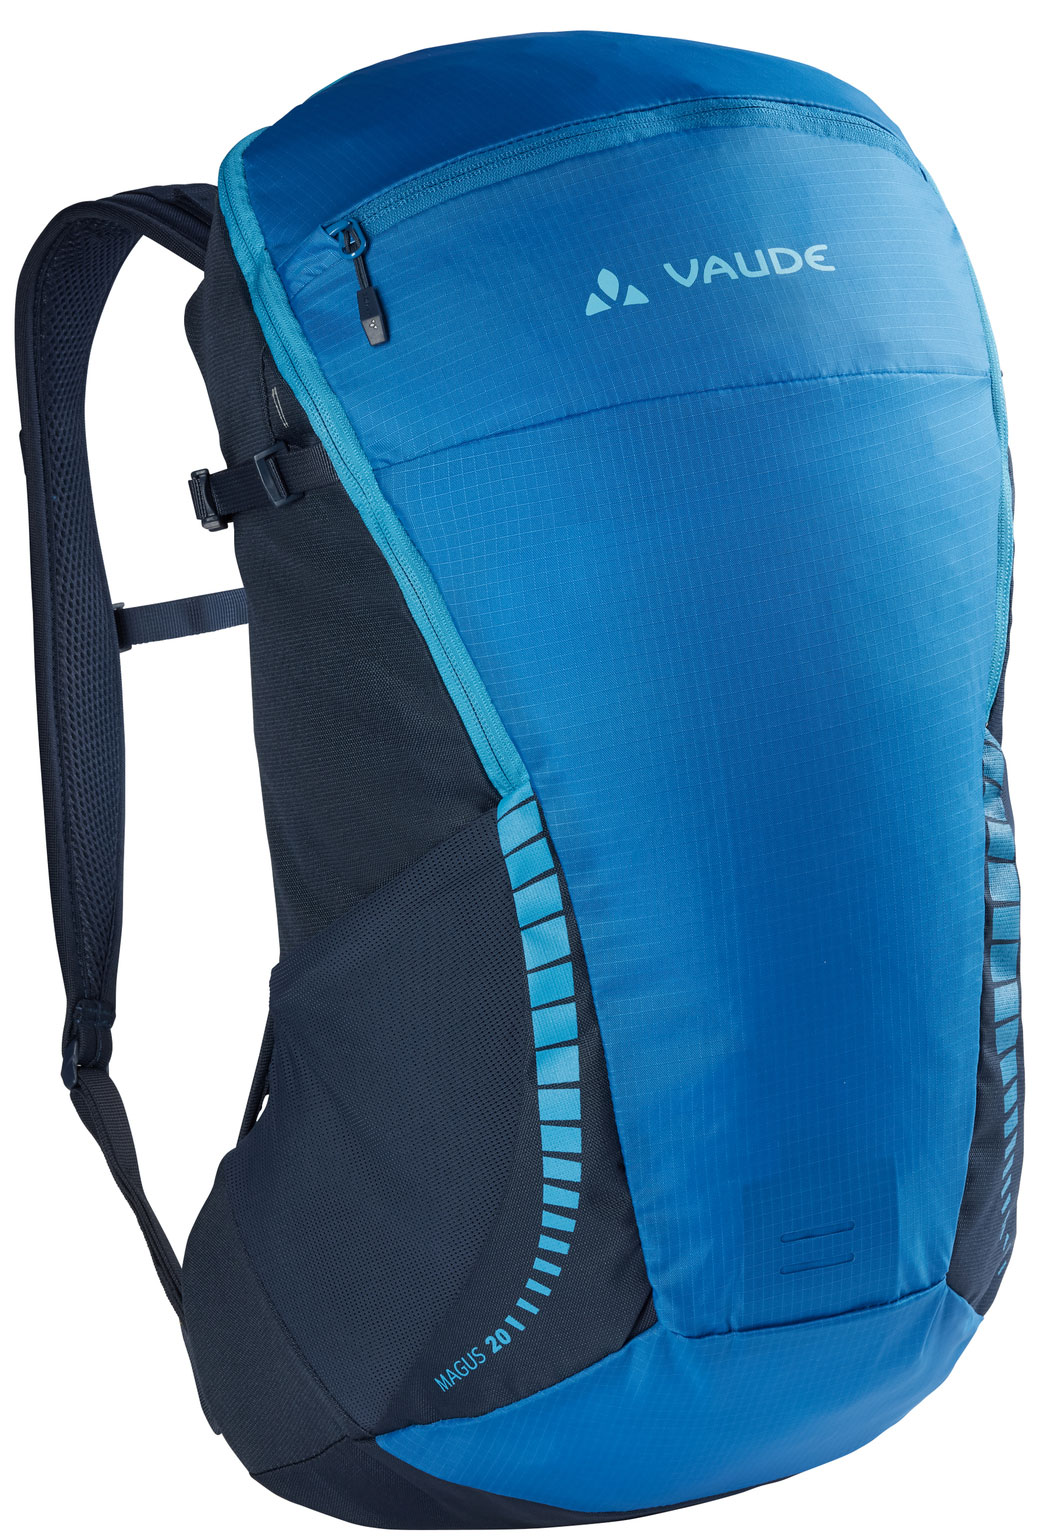 Picture of Vaude Magus 20 Backpack - blue